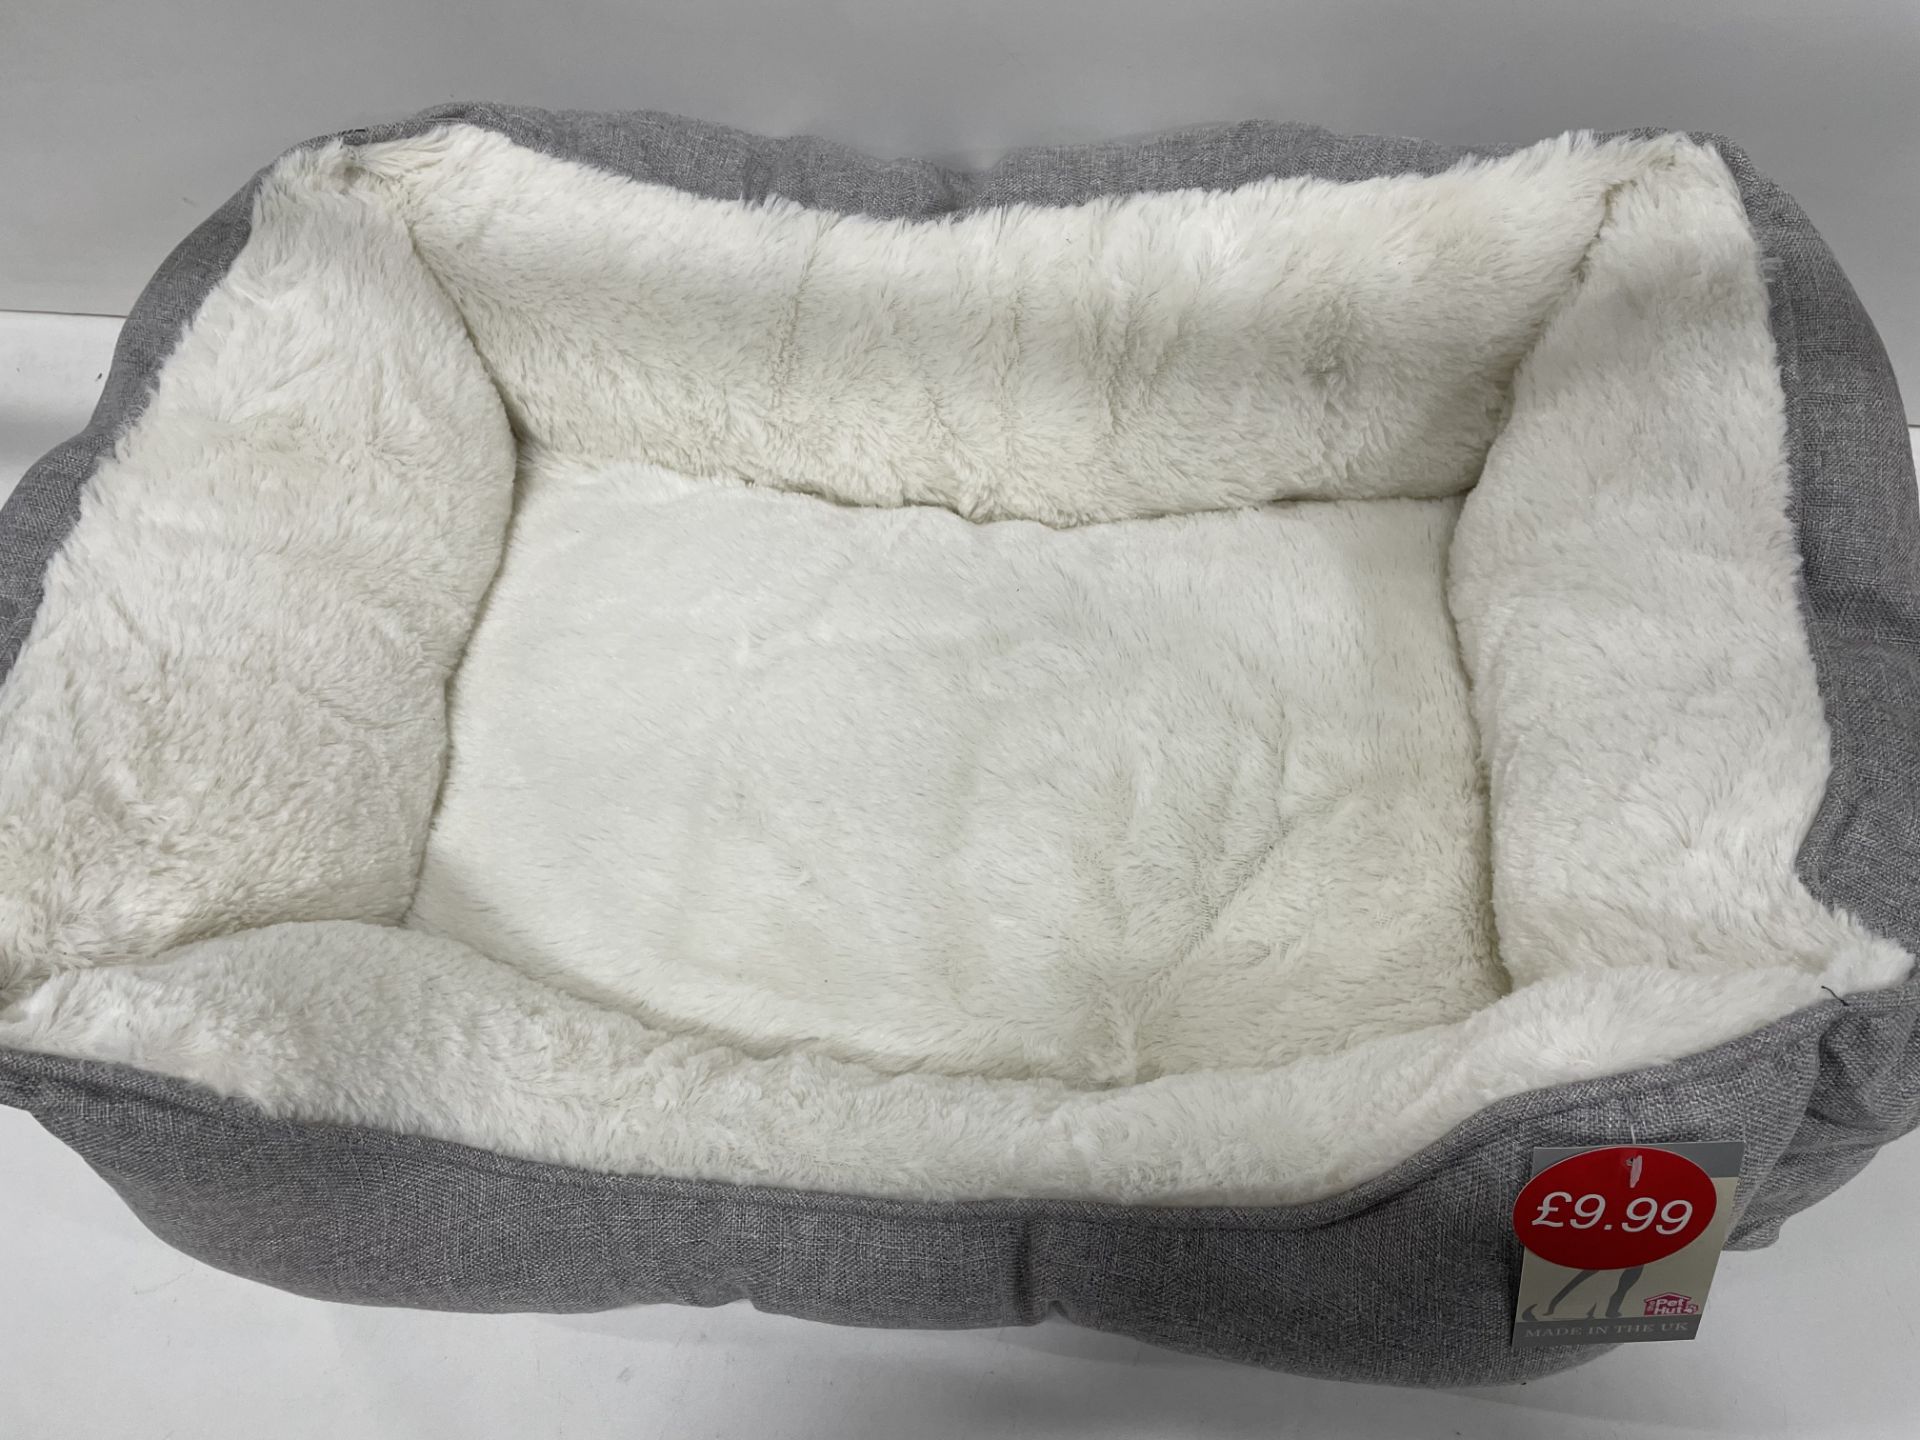 28 x Linen Square M Pet Beds - Grey - RRP£279 - RETAILER LABEL TO BE REMOVED - Image 3 of 4